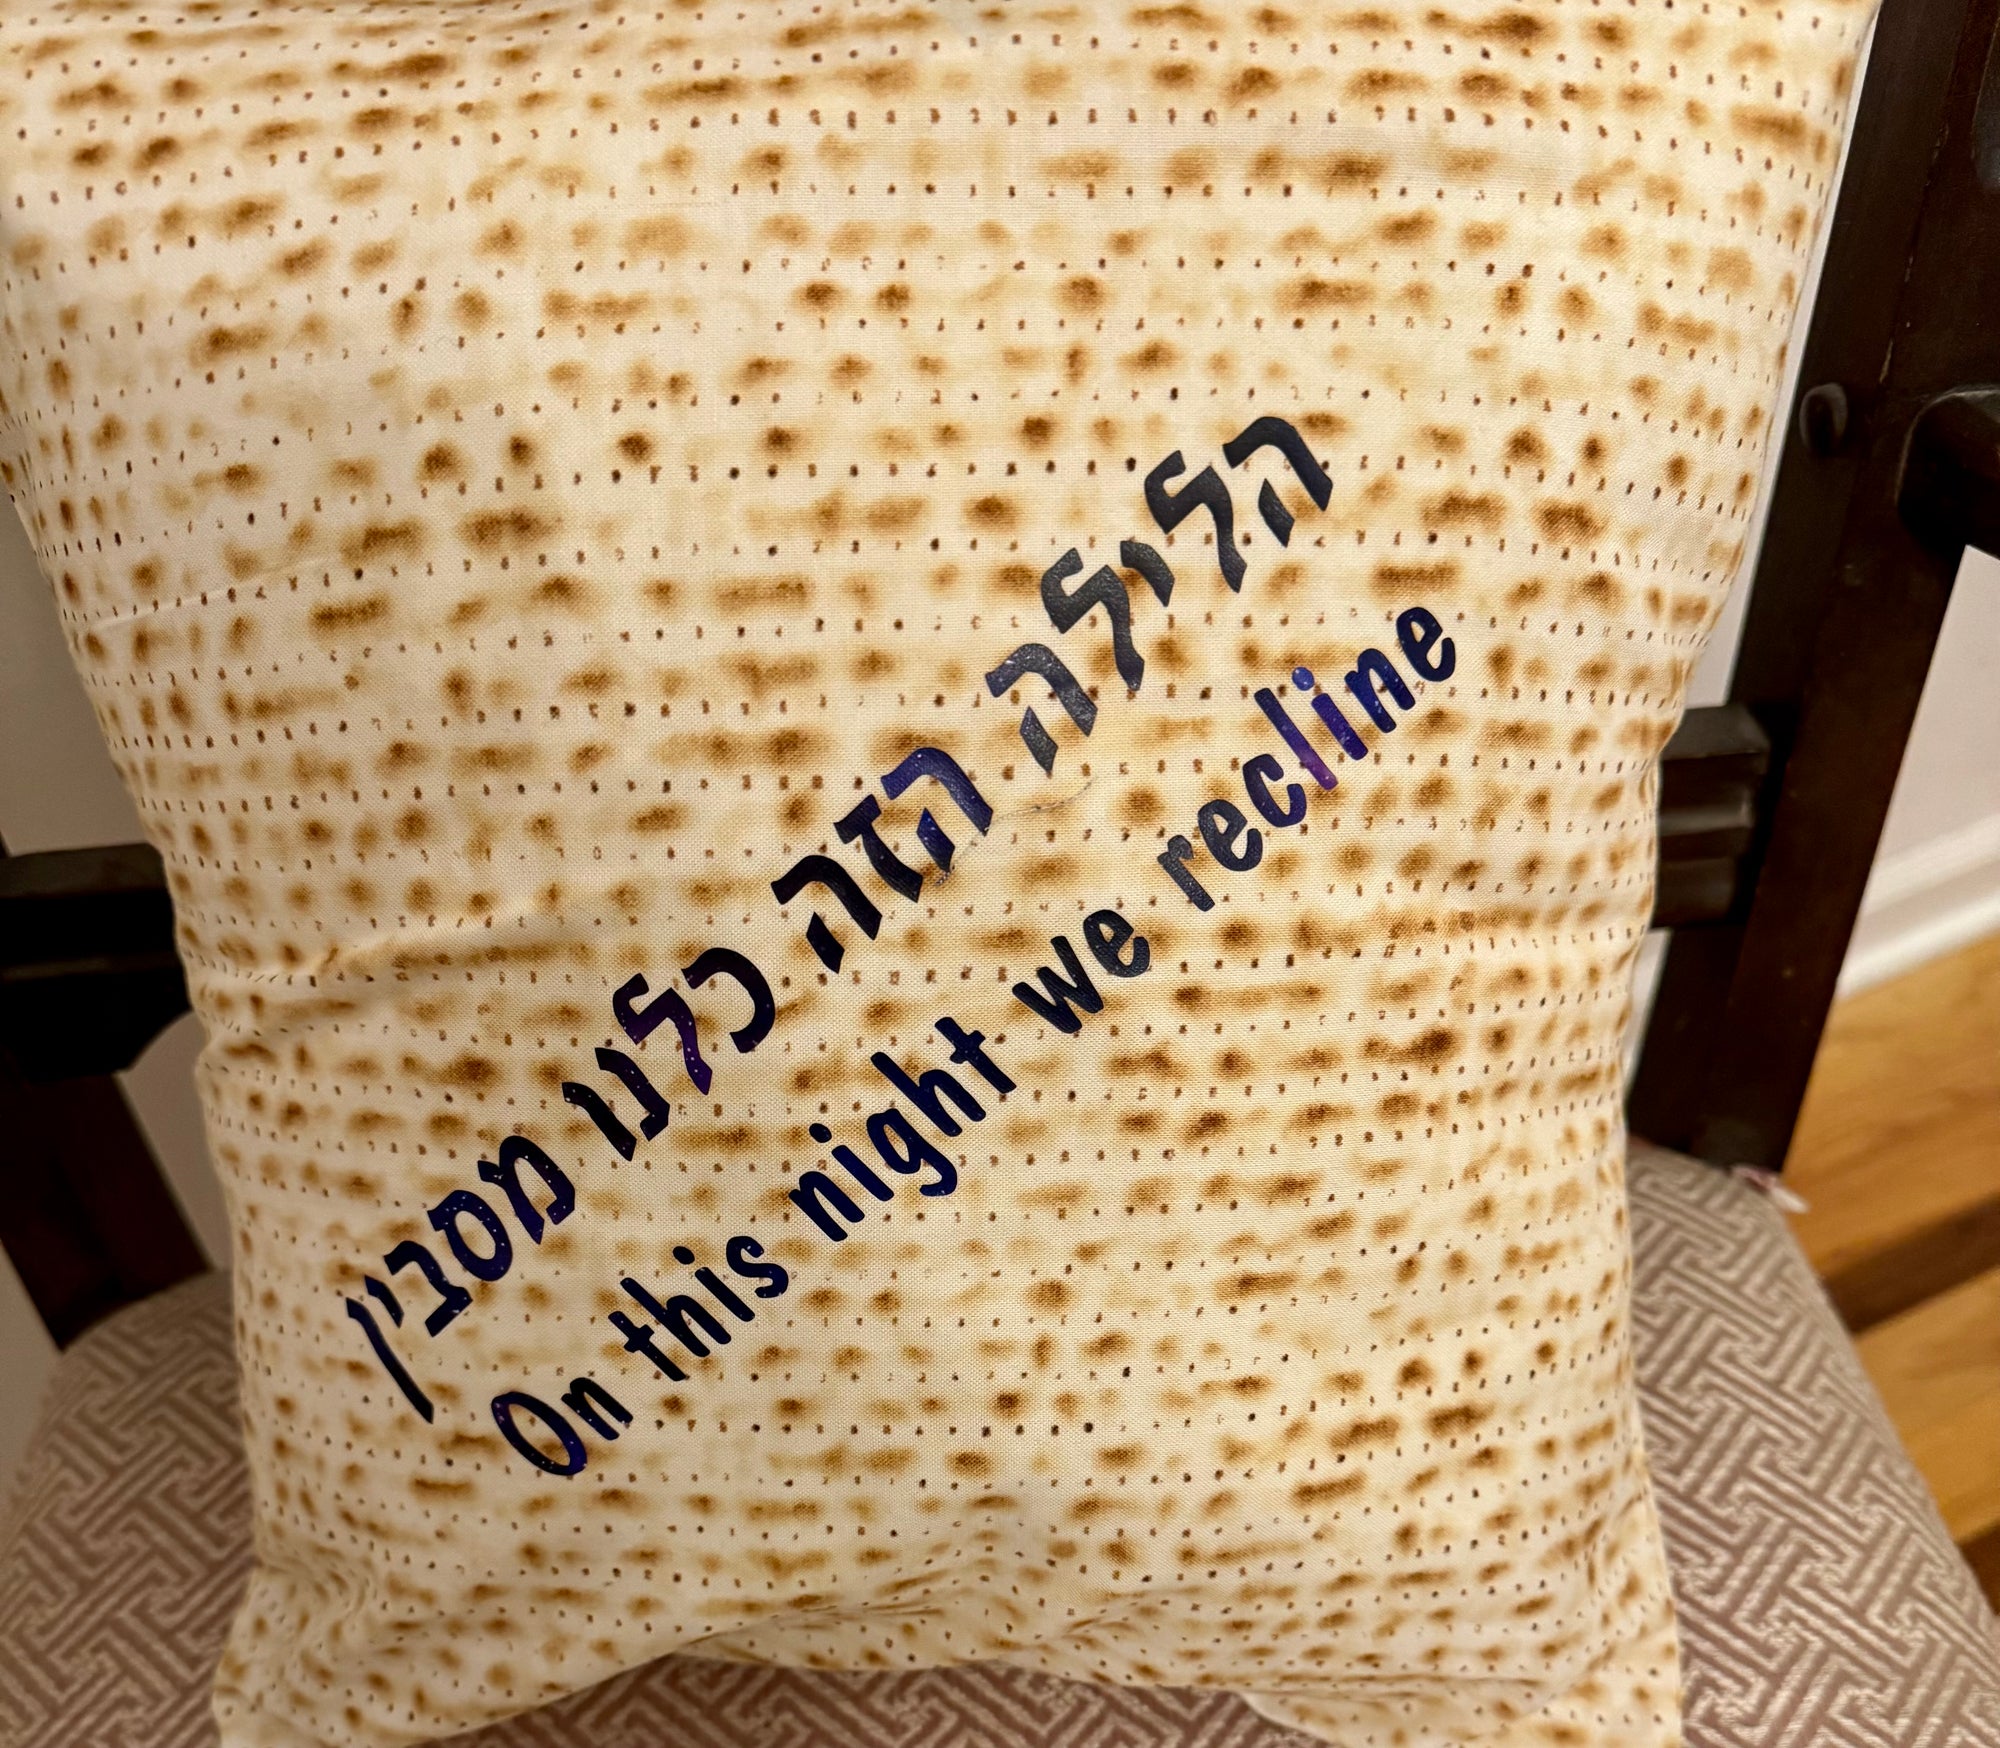 Passover Leaning Pillow. Pesach seder leaning pillow